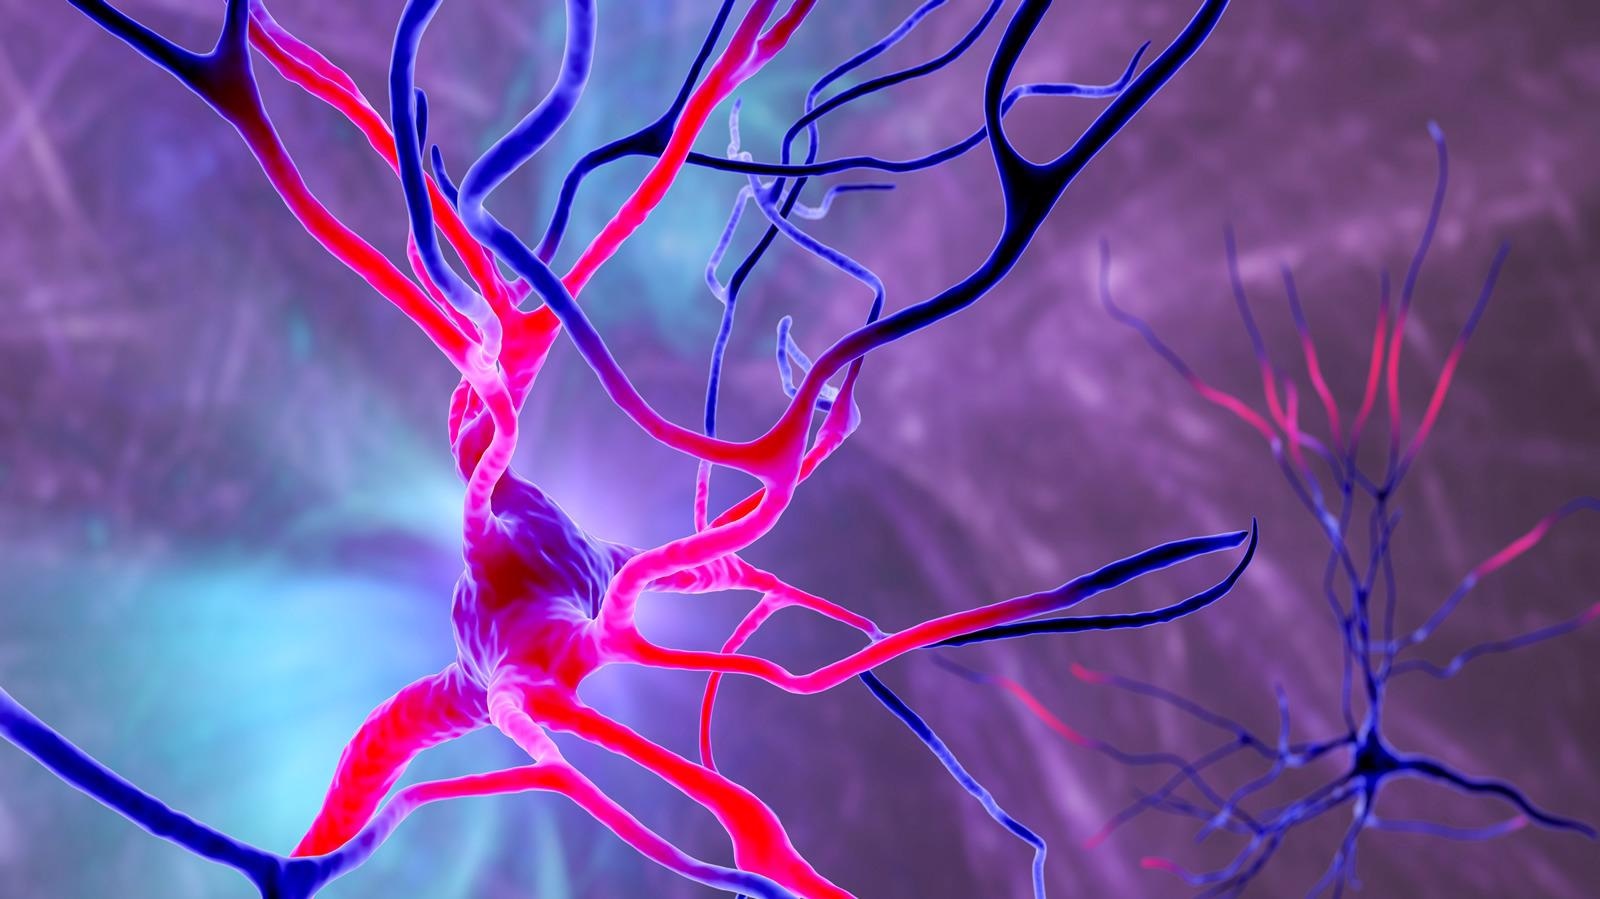 Study: Severe COVID-19 induces molecular signatures of aging in the human brain. Image Credit: Kateryna Kon / Shutterstock